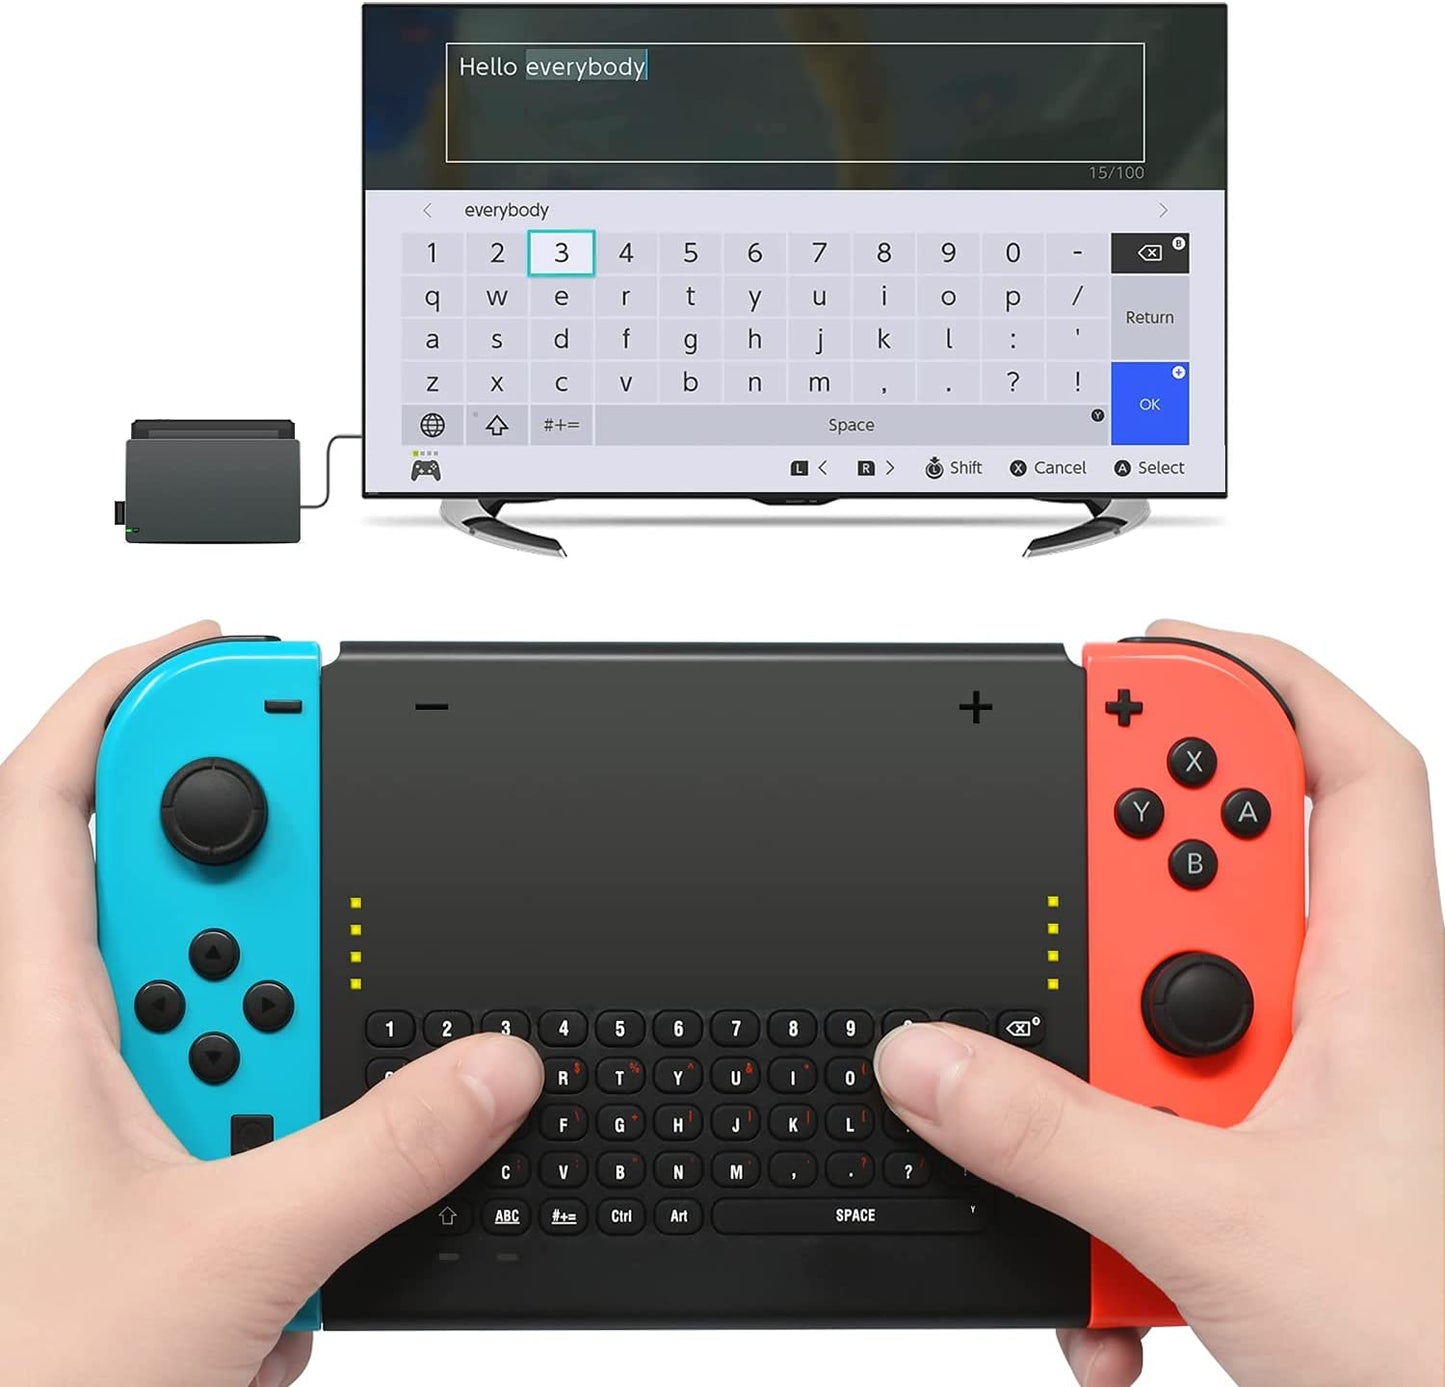 2.4G Wireless Keyboard with USB Receiver for Nintendo Switch/Switch OLED - Rechargeable Handheld Remote Control Gamepad Chatpad Message Keyboard